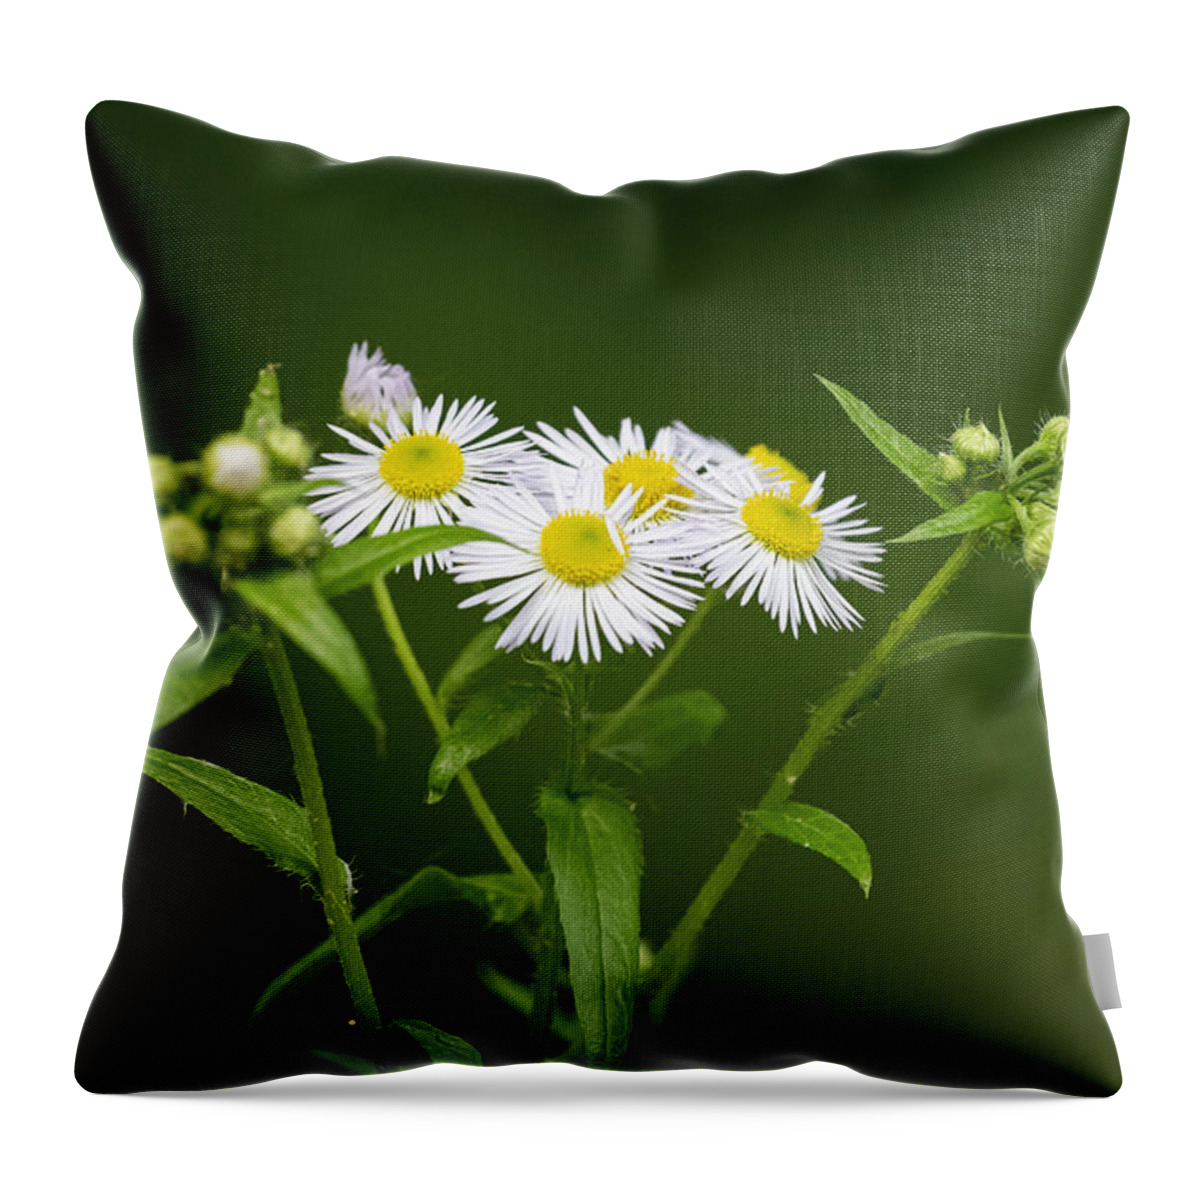 Flower Throw Pillow featuring the photograph Daisy Fleabane is Blooming by Linda Bonaccorsi